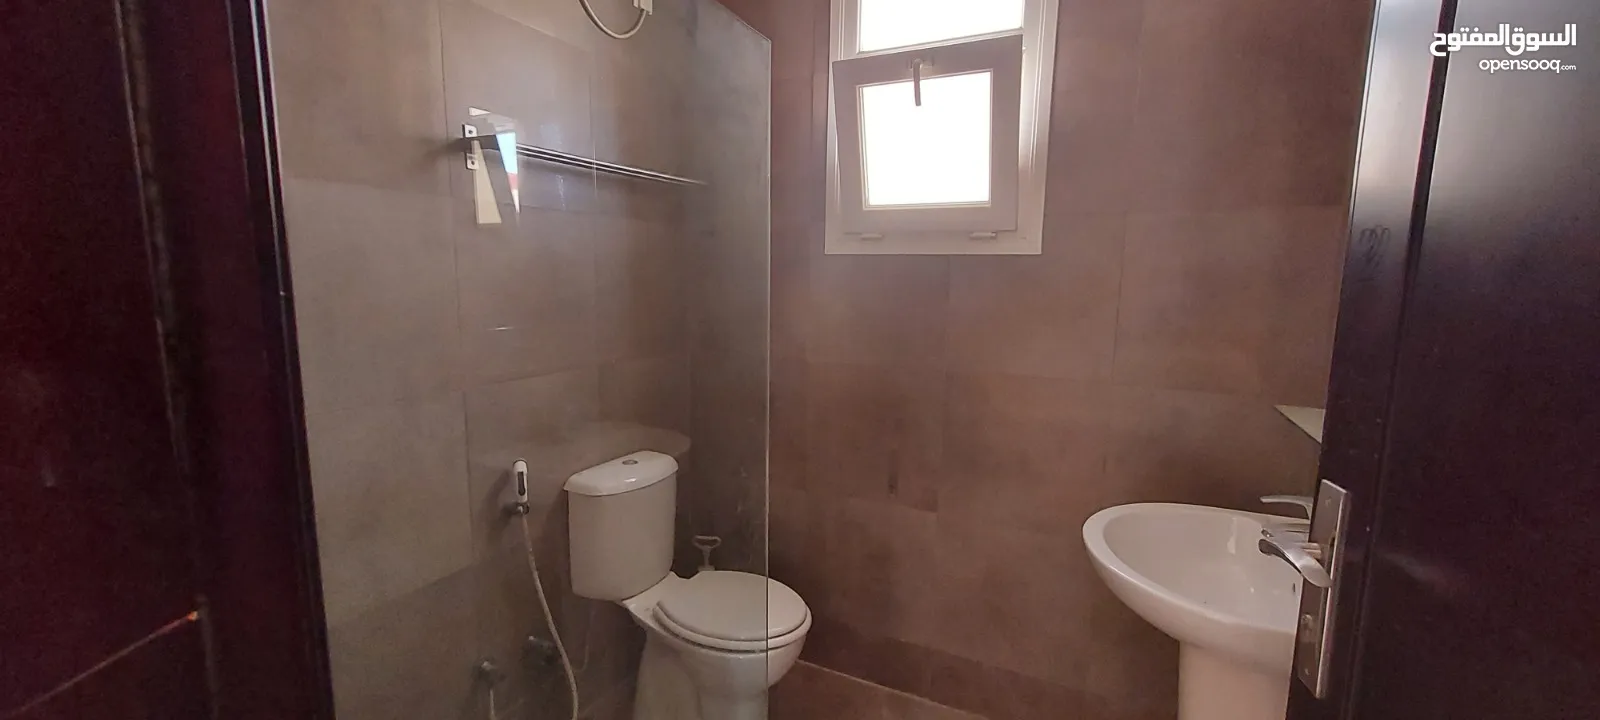 4 Bedrooms Apartment for Rent in Ansab REF:803R